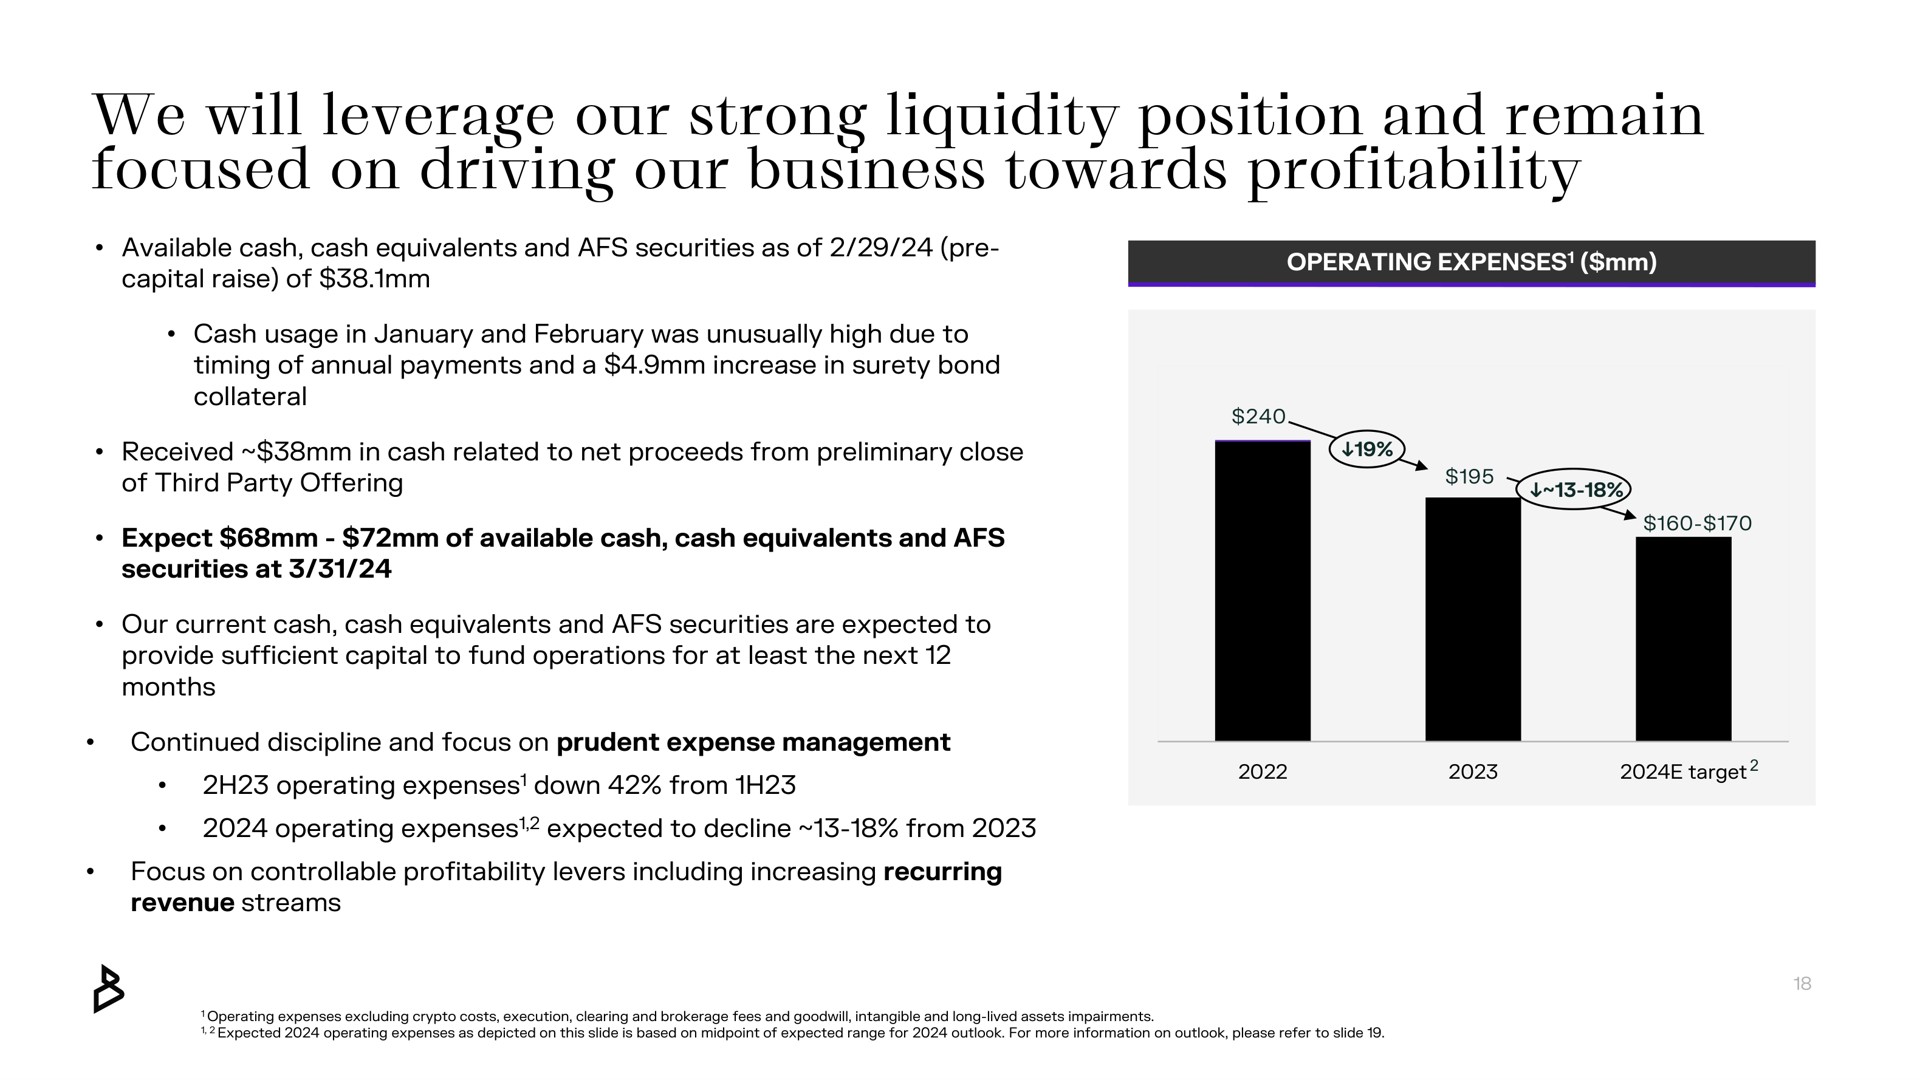 we will leverage our strong liquidity position and remain focused on driving our business towards profitability | Bakkt